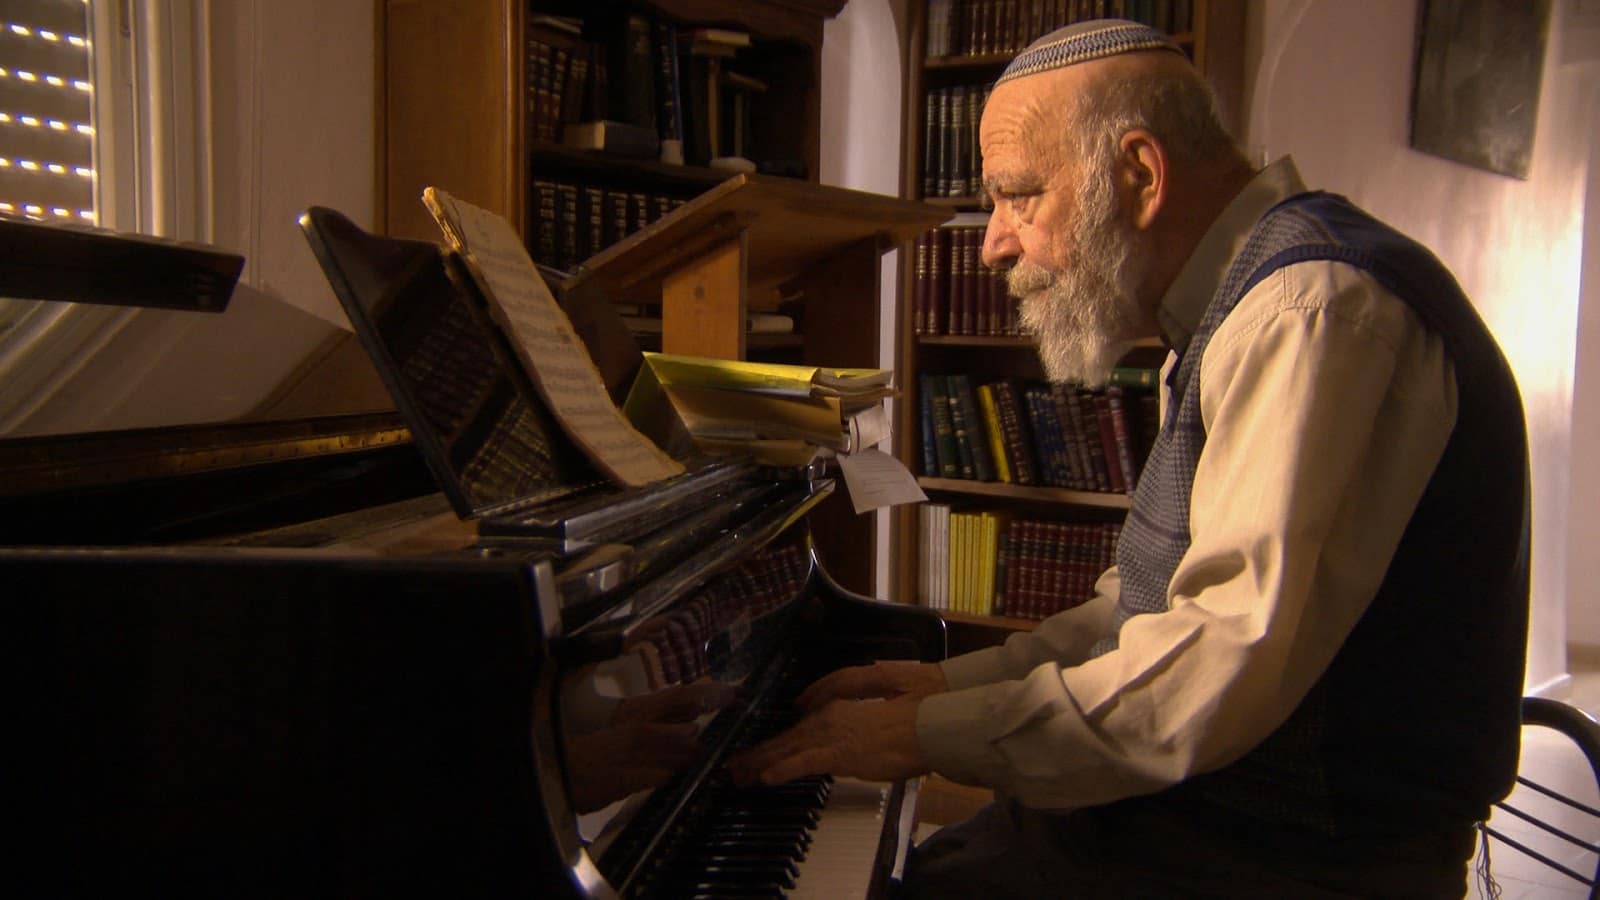 Composer sets Talmud study to music